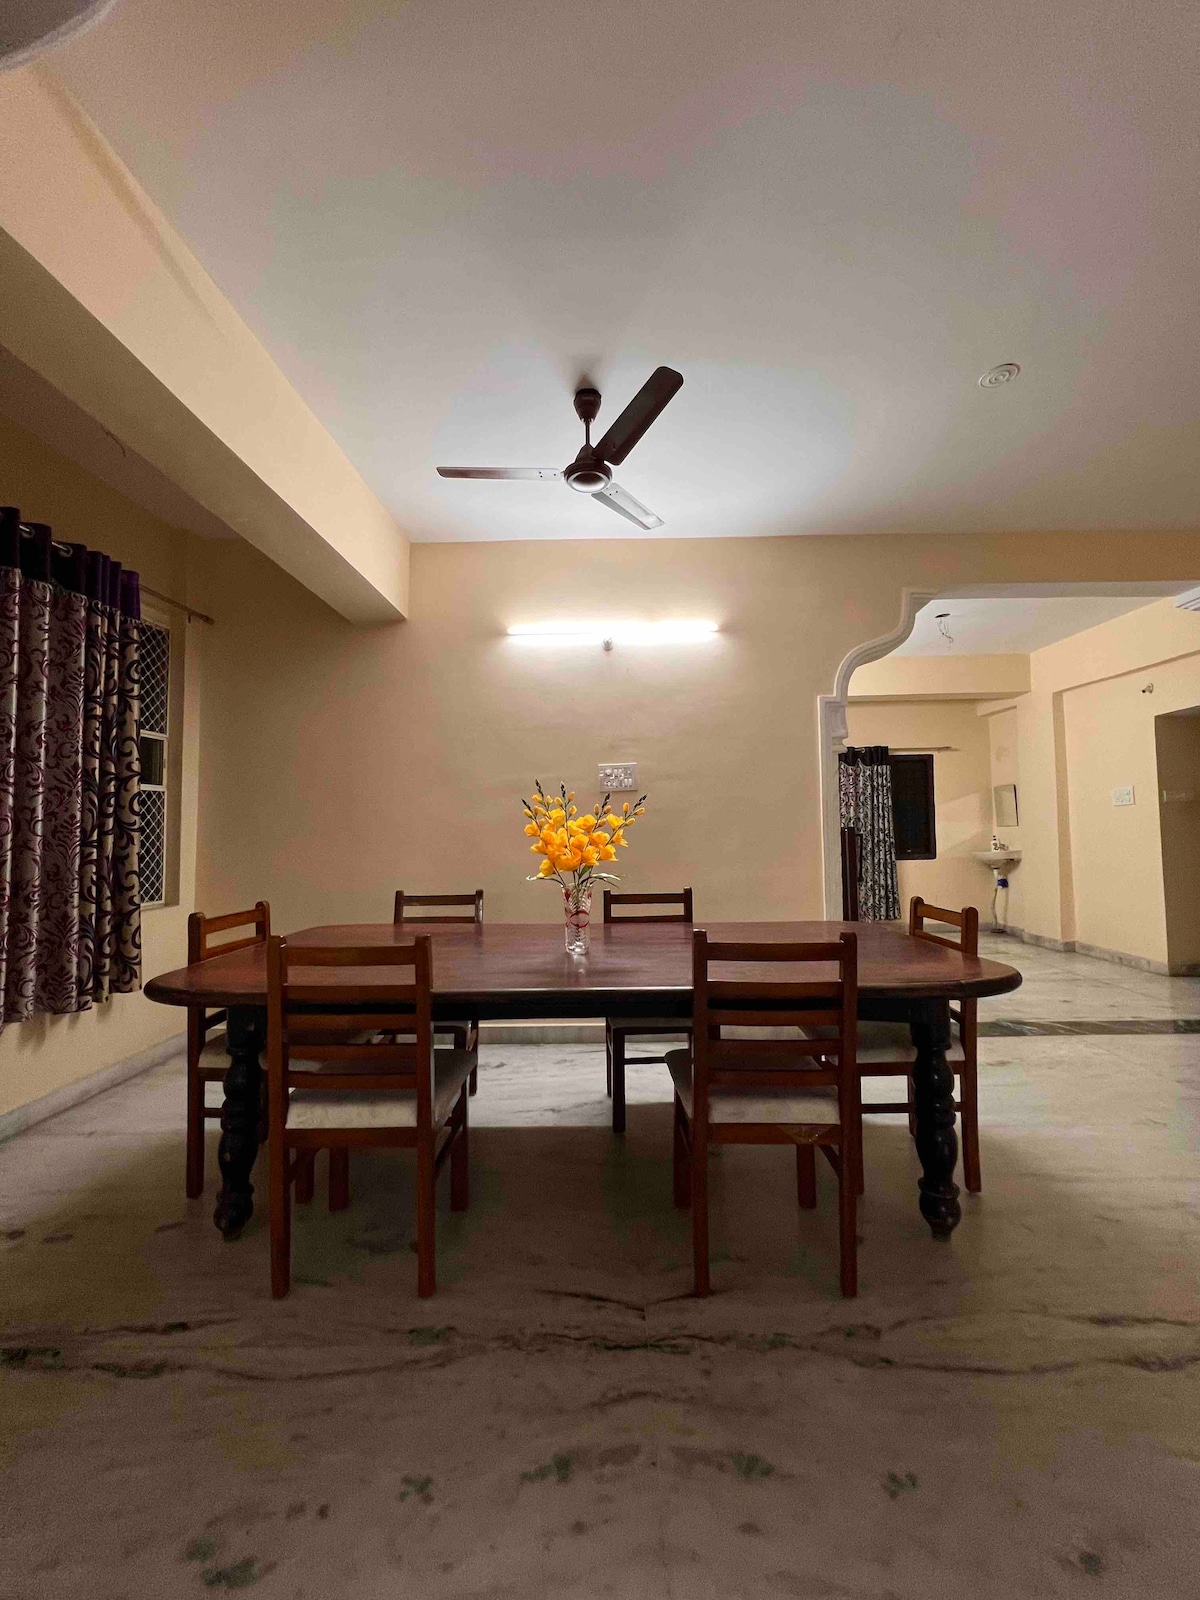 Lovely4 bedroom furnished apt ideal fr small party